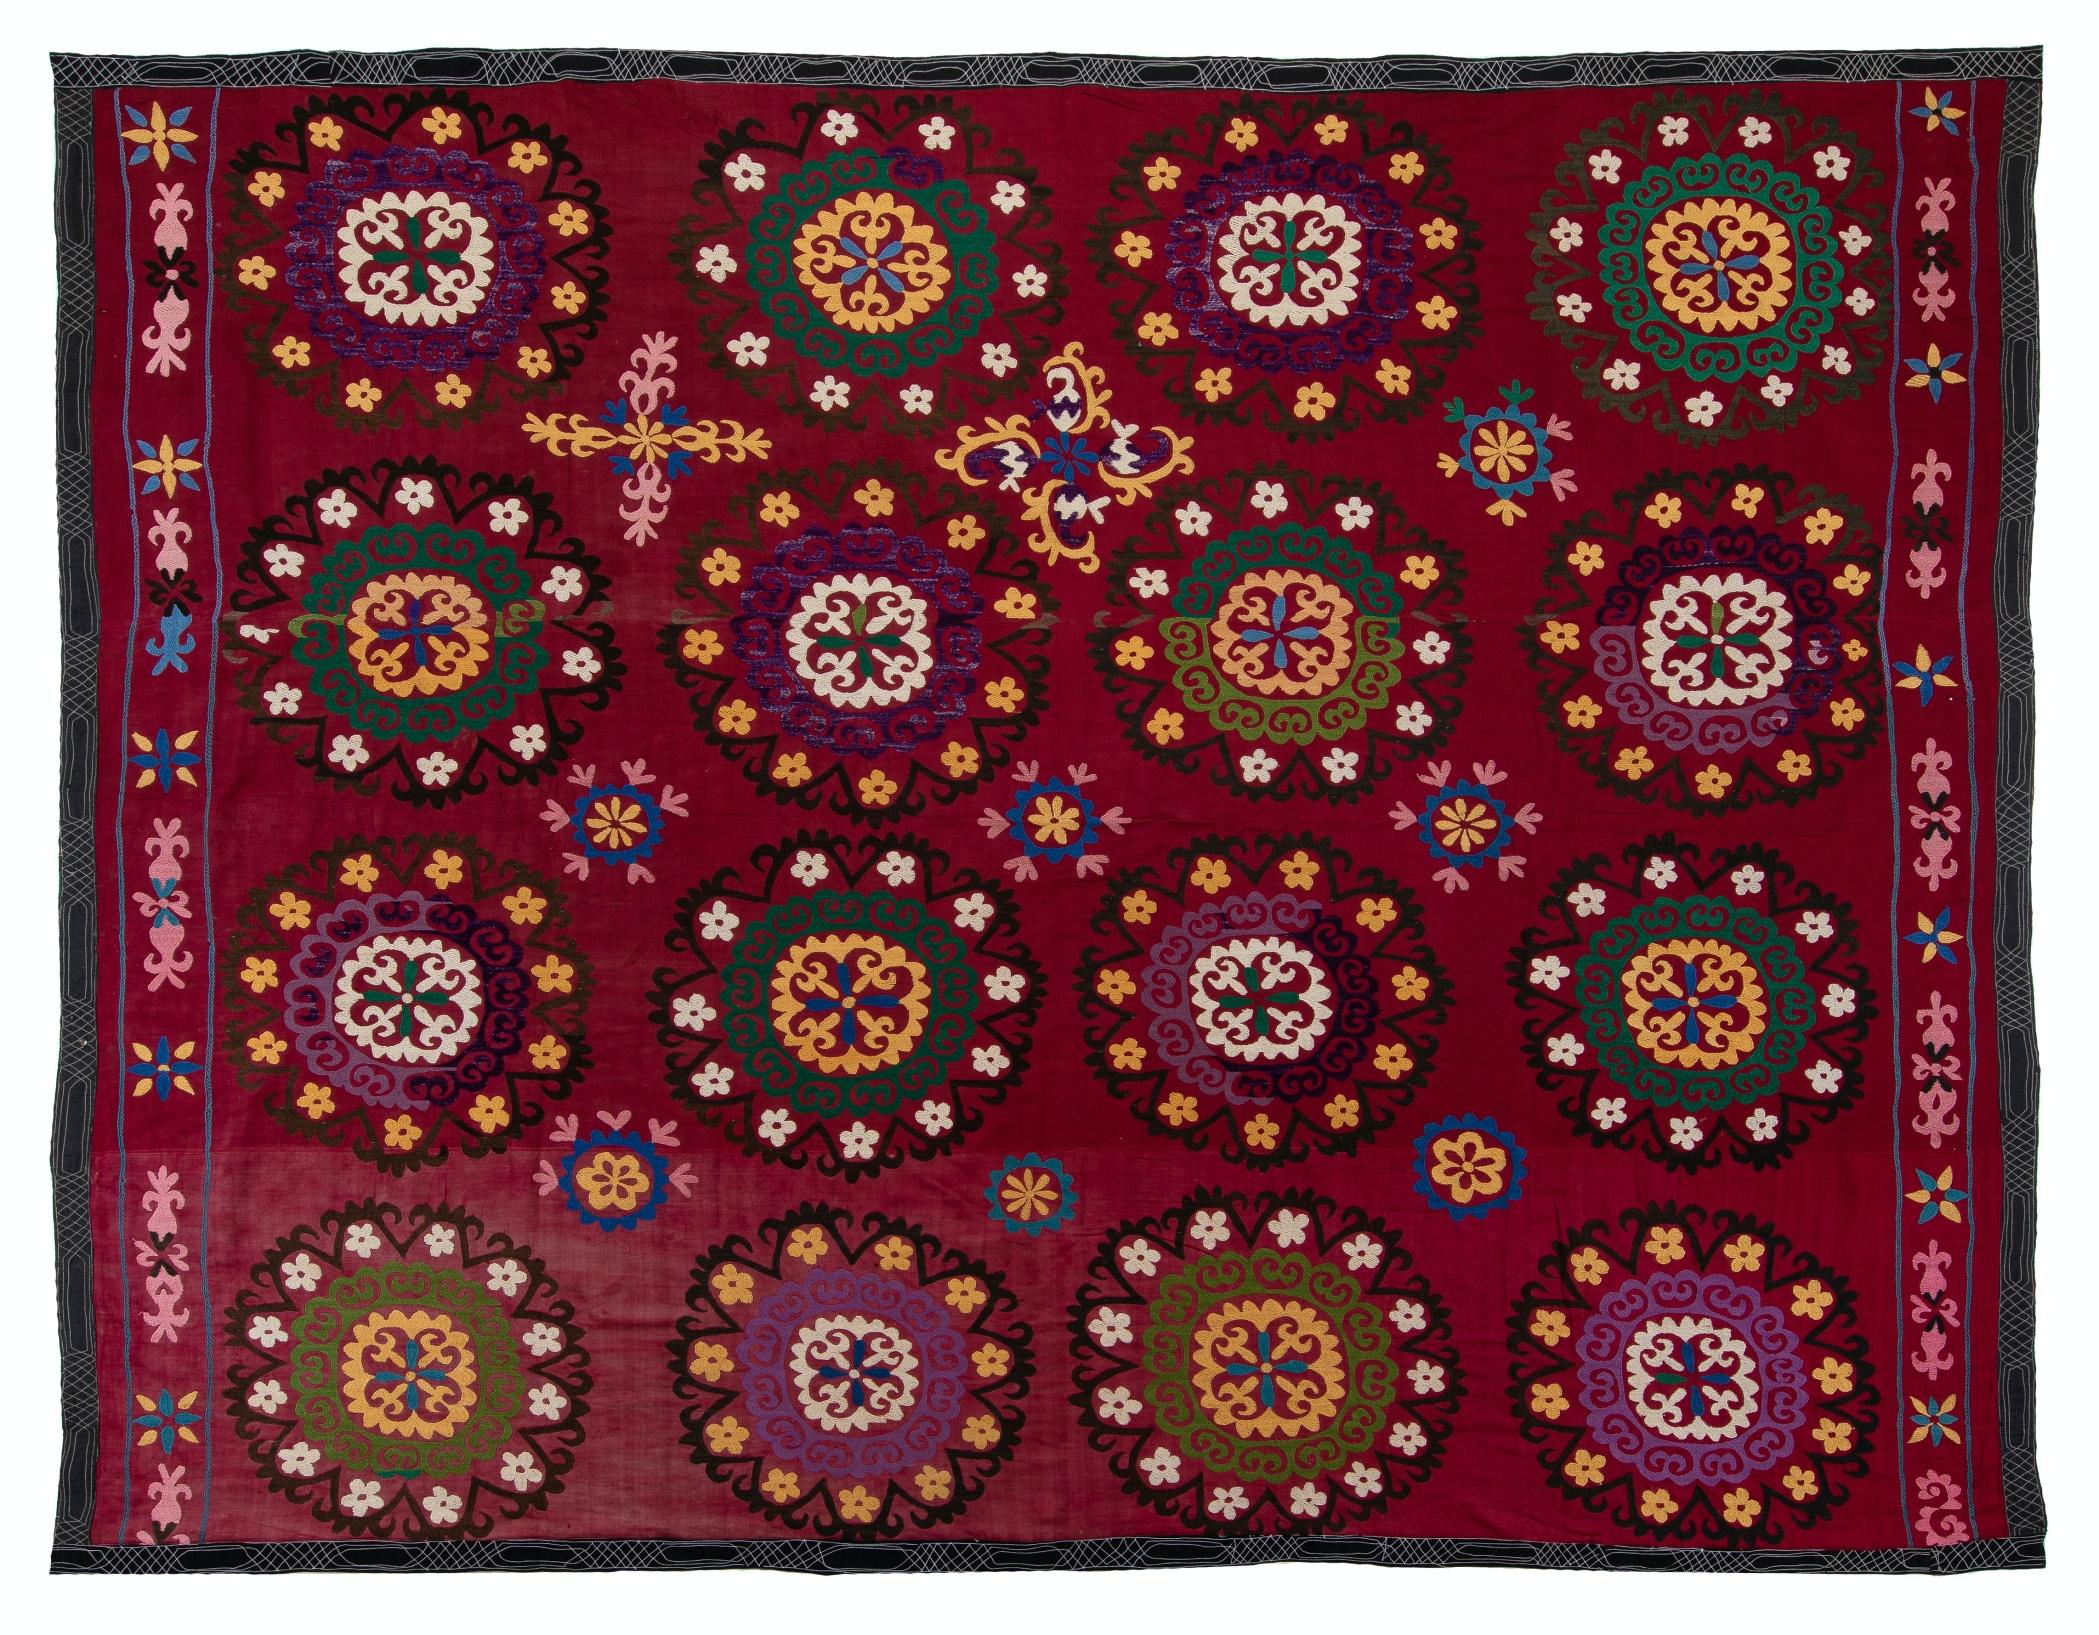 6.8x7.8 Ft Central Asian Suzani Textile, Embroidered Cotton & Silk Wall Hanging For Sale 2